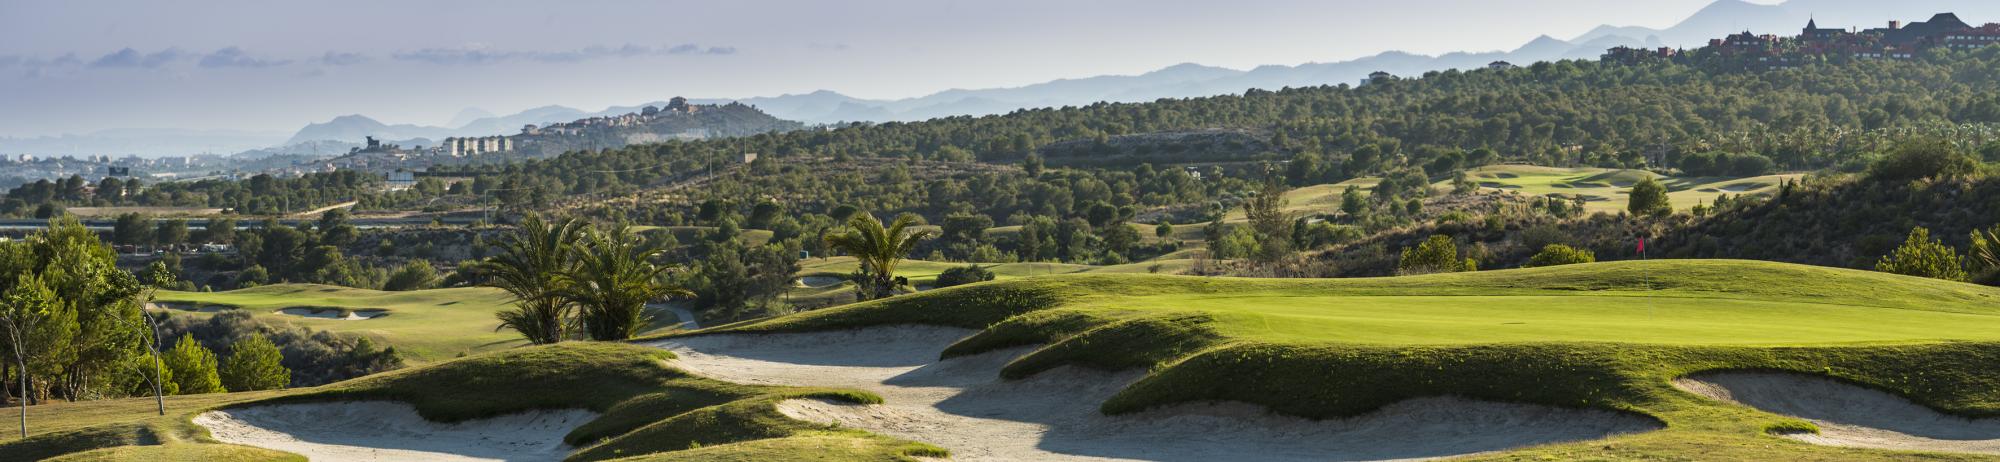 Villaitana Poniente Golf Course includes some of the finest golf course within Costa Blanca